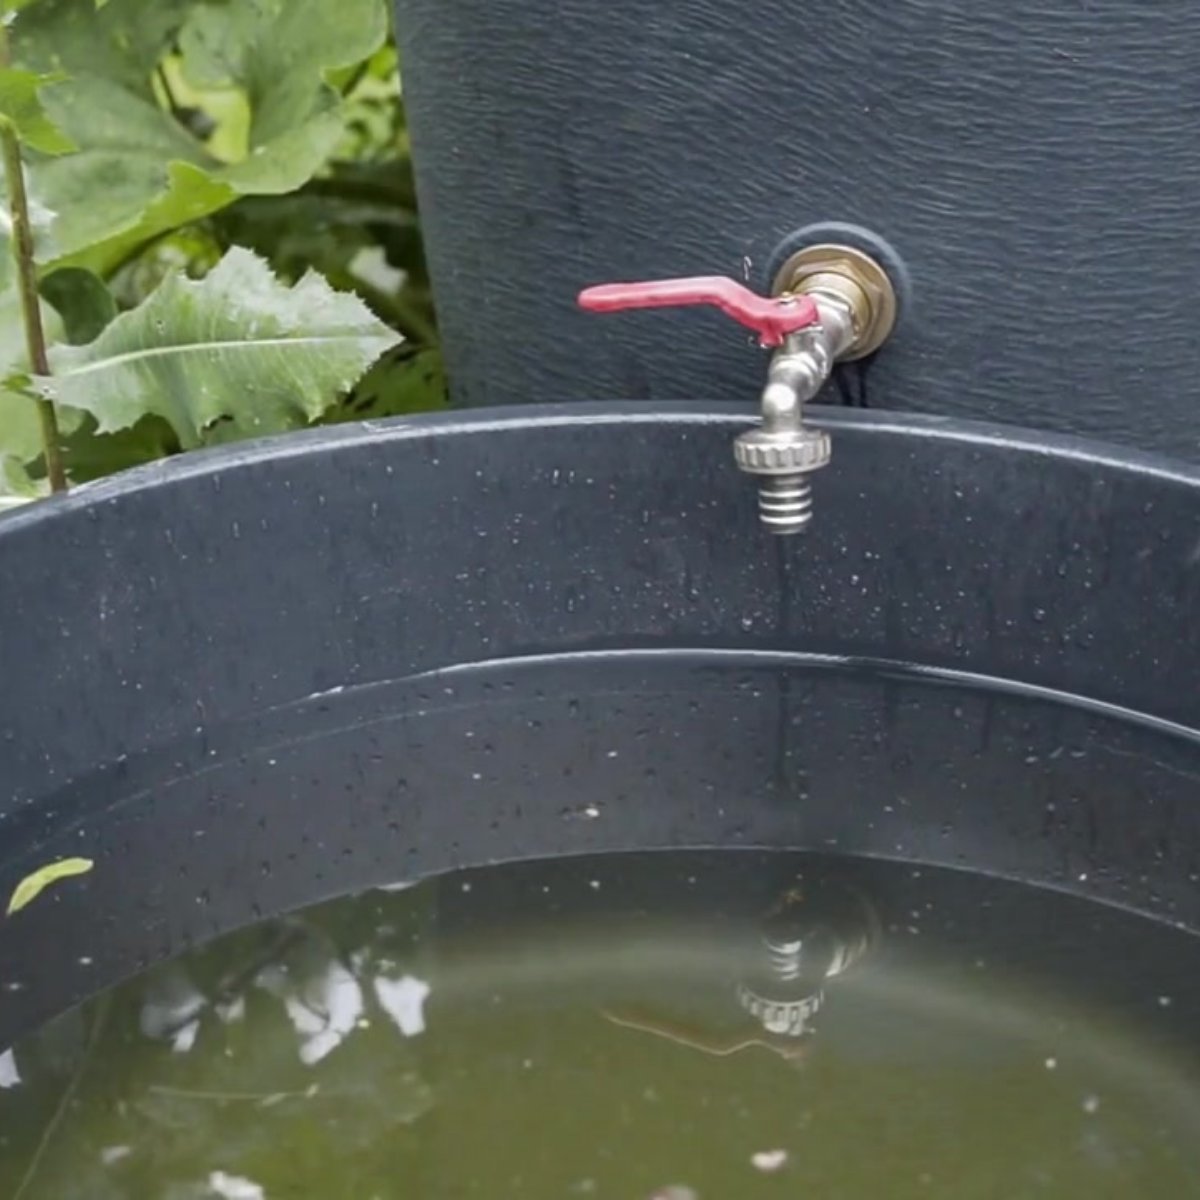 Interested in going green? ♻️ Discover the uses and benefits of rain barrels and learn how to make your own in just a few simple steps. 📌 Uses & Benefits of Rain Barrels 🗓️ Friday, April 19 🕗 7 to 8 p.m. EST This event is being offered at no charge. ow.ly/nmJu50R6QEI